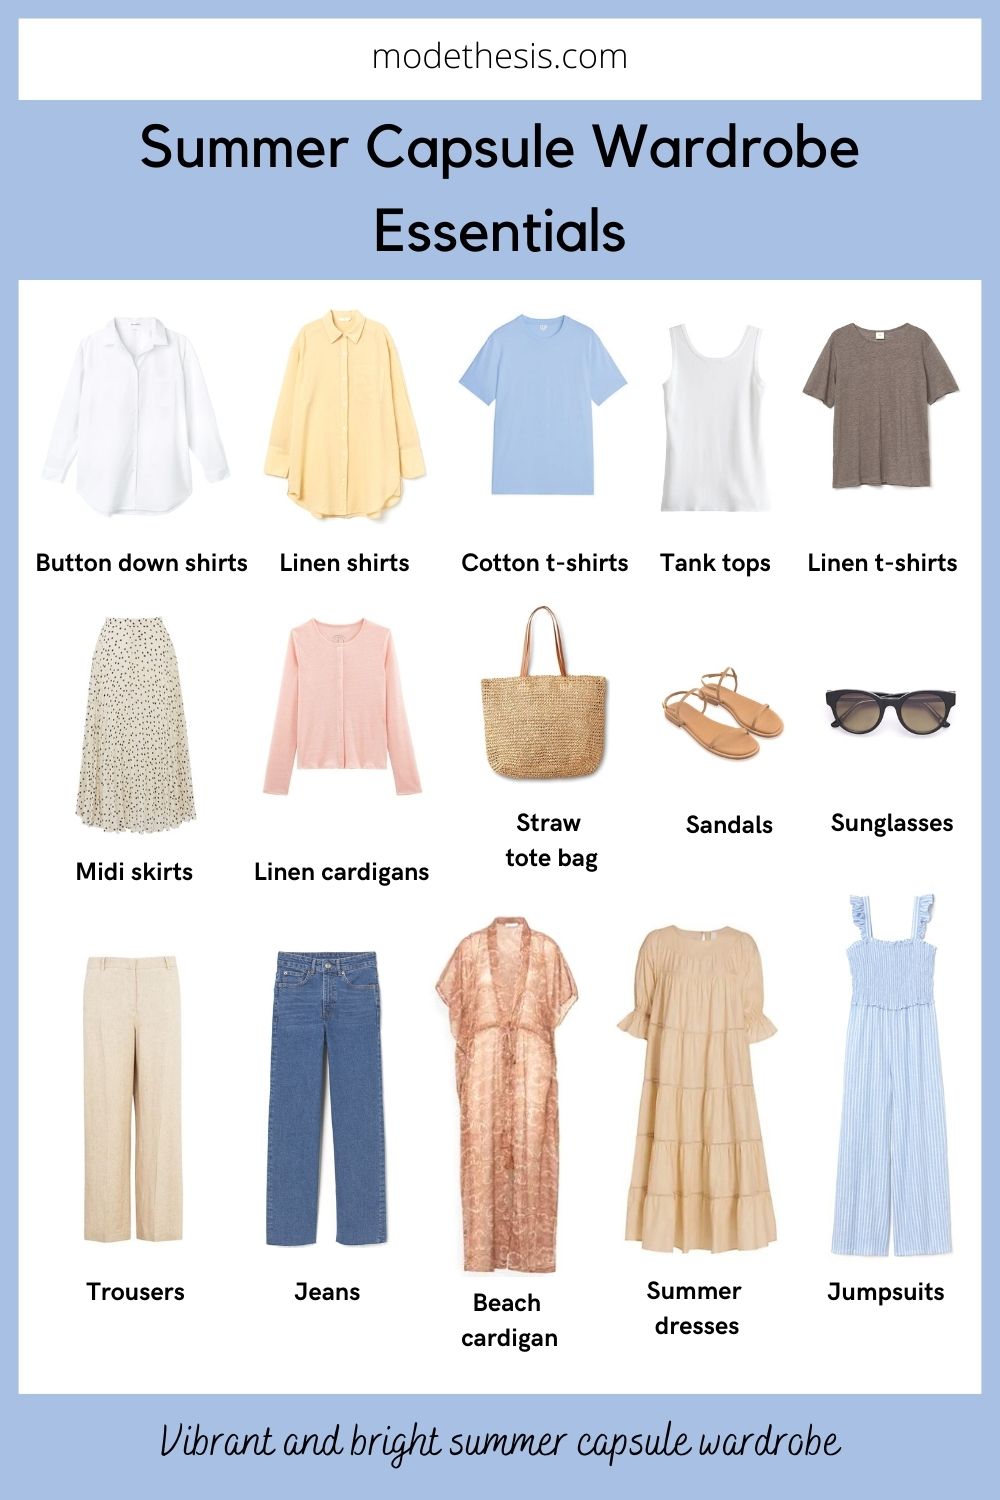 Summer Capsule Wardrobe Checklist + Outfit Ideas - Mode Thesis